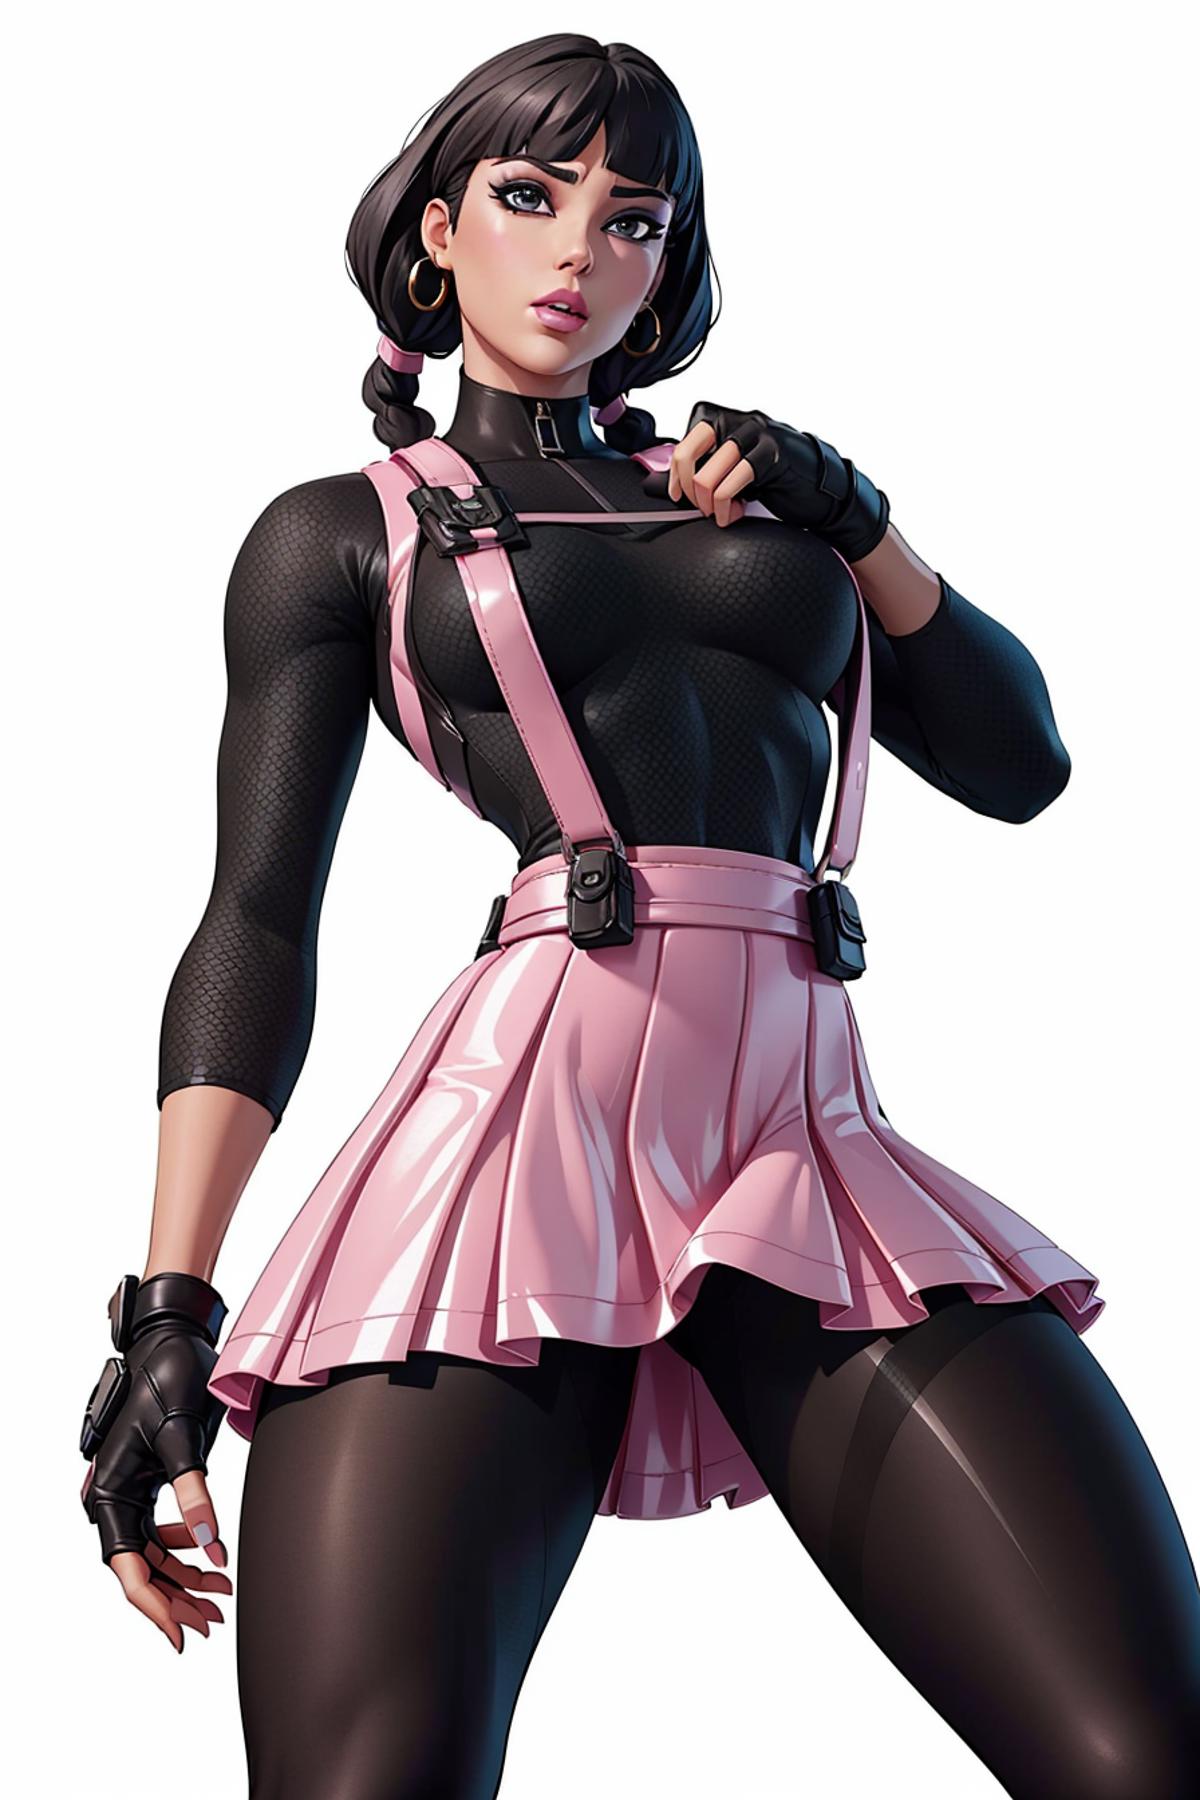 Chic (Fortnite) image by NotEnoughVRAM